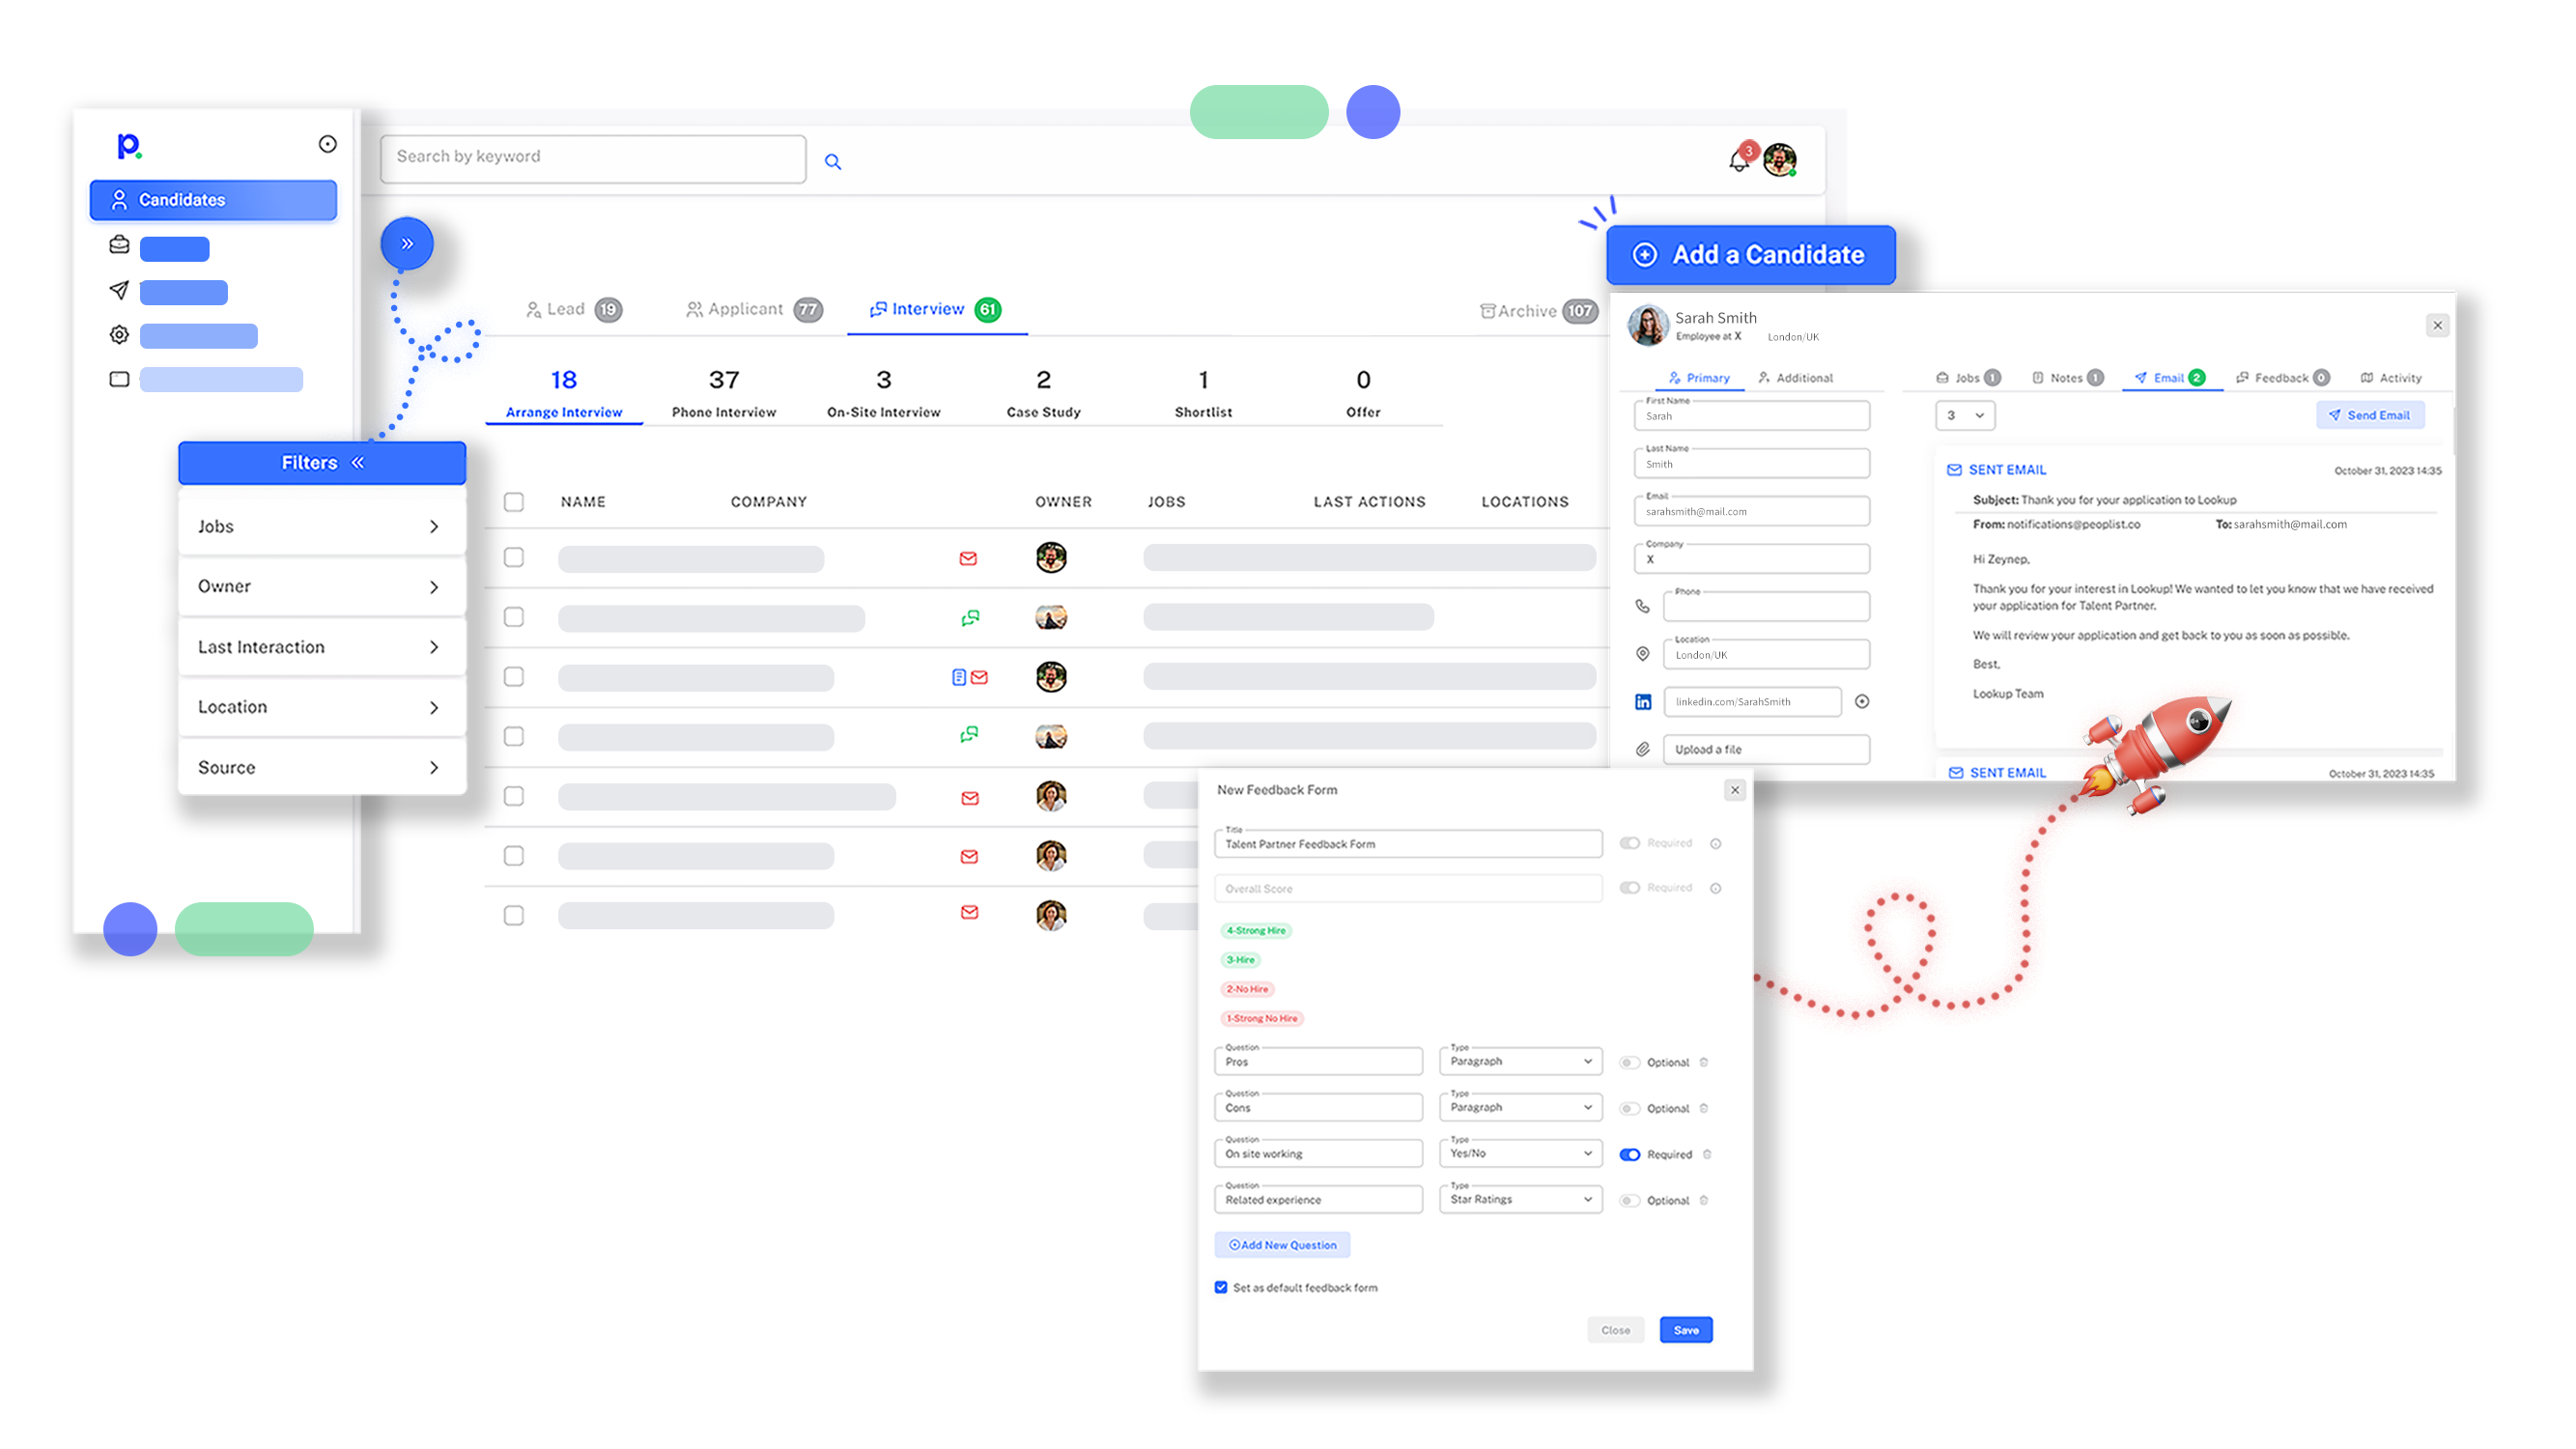  Peoplist: All-in-one recruitment platform with a user-friendly interface, simplifying the process of finding the right candidates for talent acquisition teams.